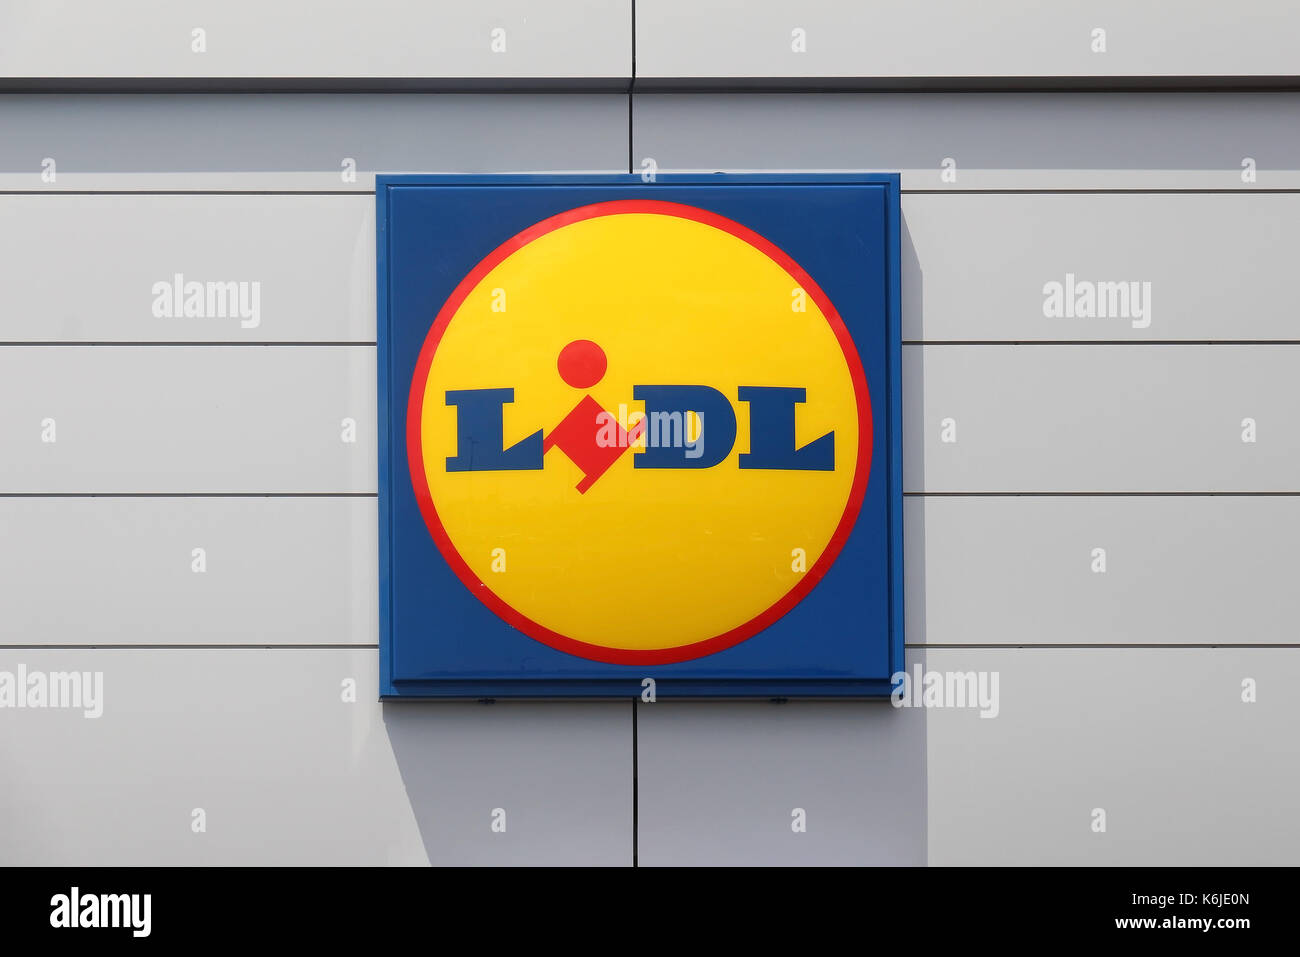 VIENNA, AUSTRIA - JULY 10, 2015: Large Lidl logo sign on facade of supermarket. Lidl is a German global discount supermarket chain that operates in ov Stock Photo